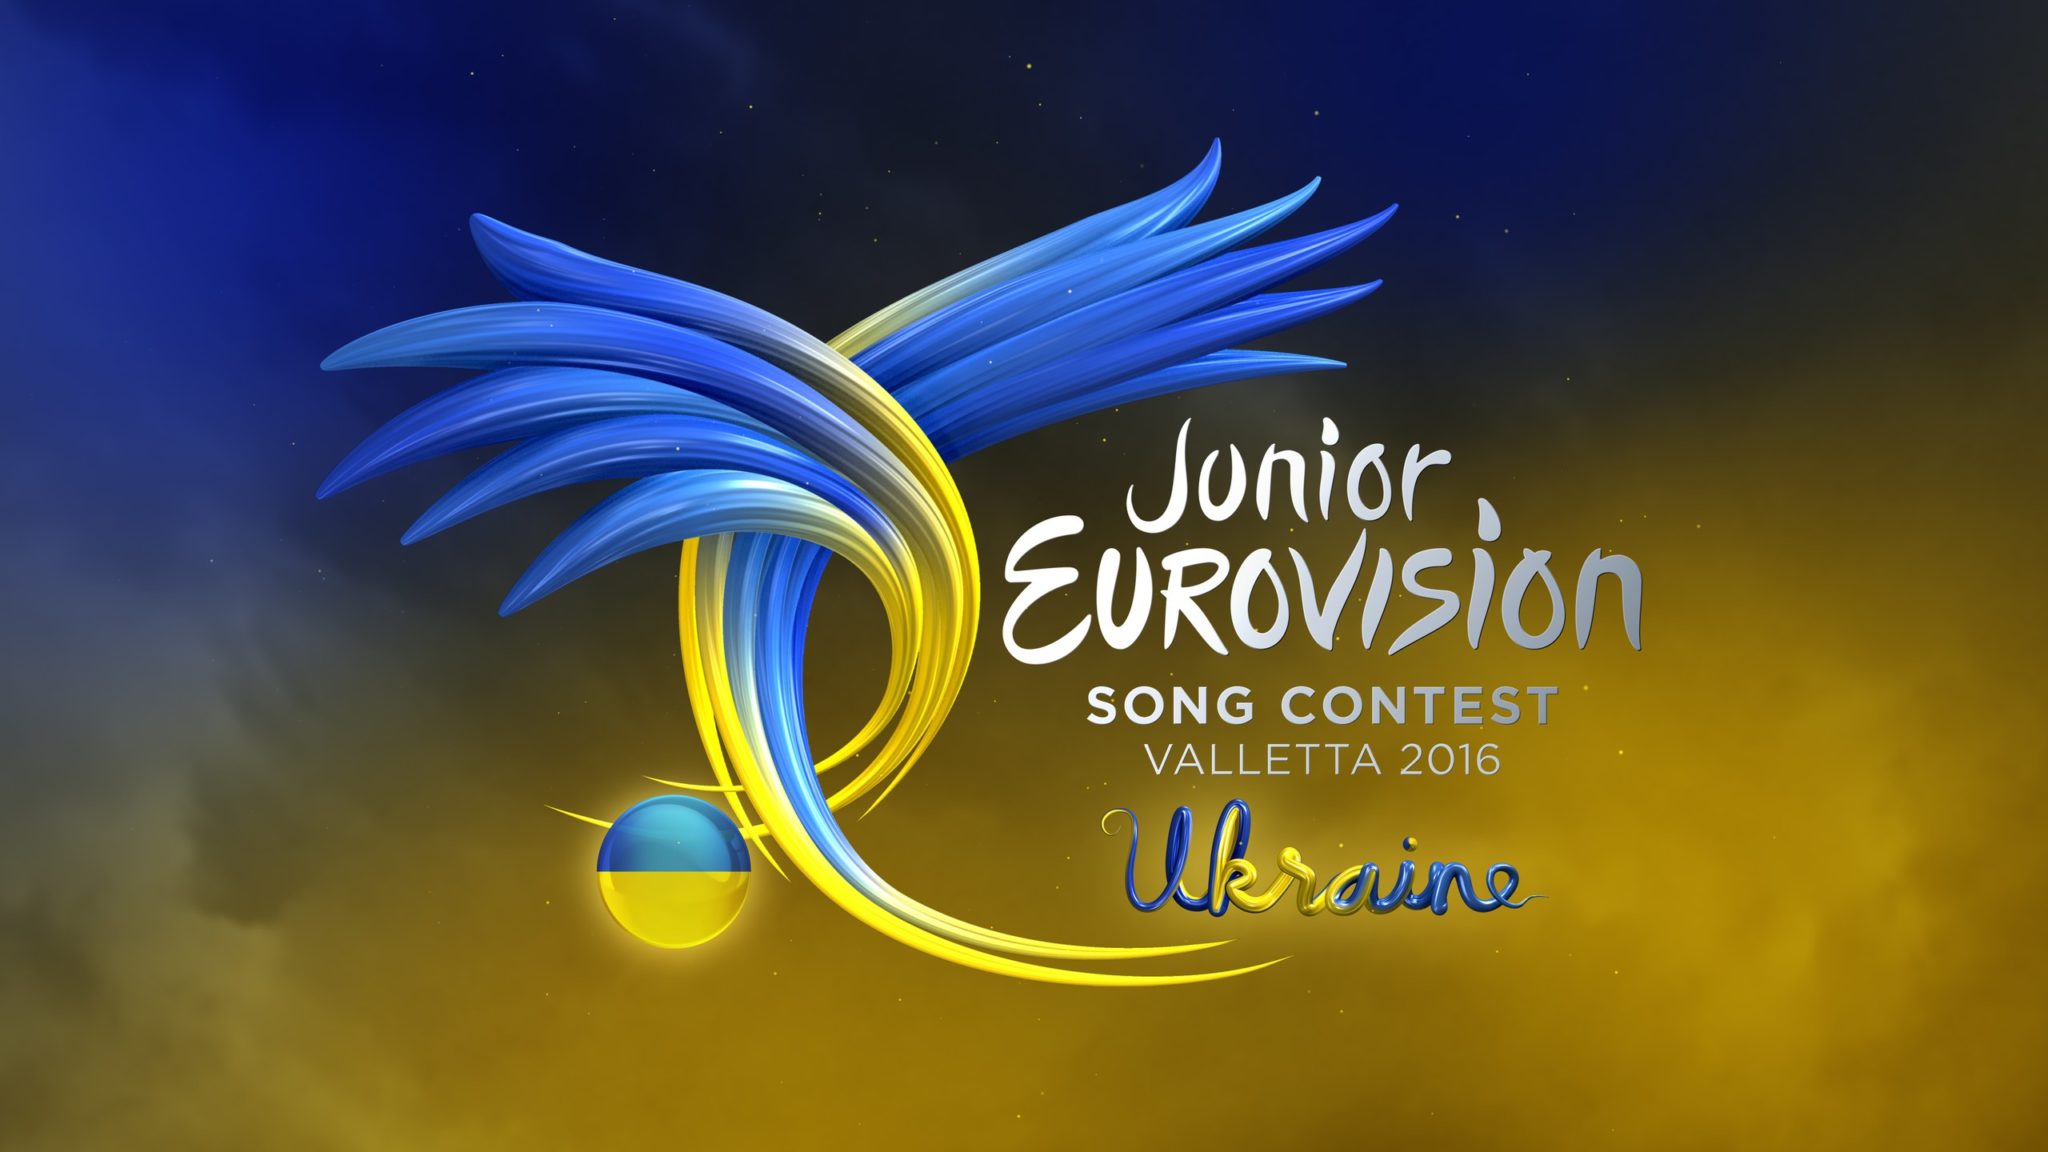 Ukraine officially confirms participation for Junior Eurovision 2016, submissions open!